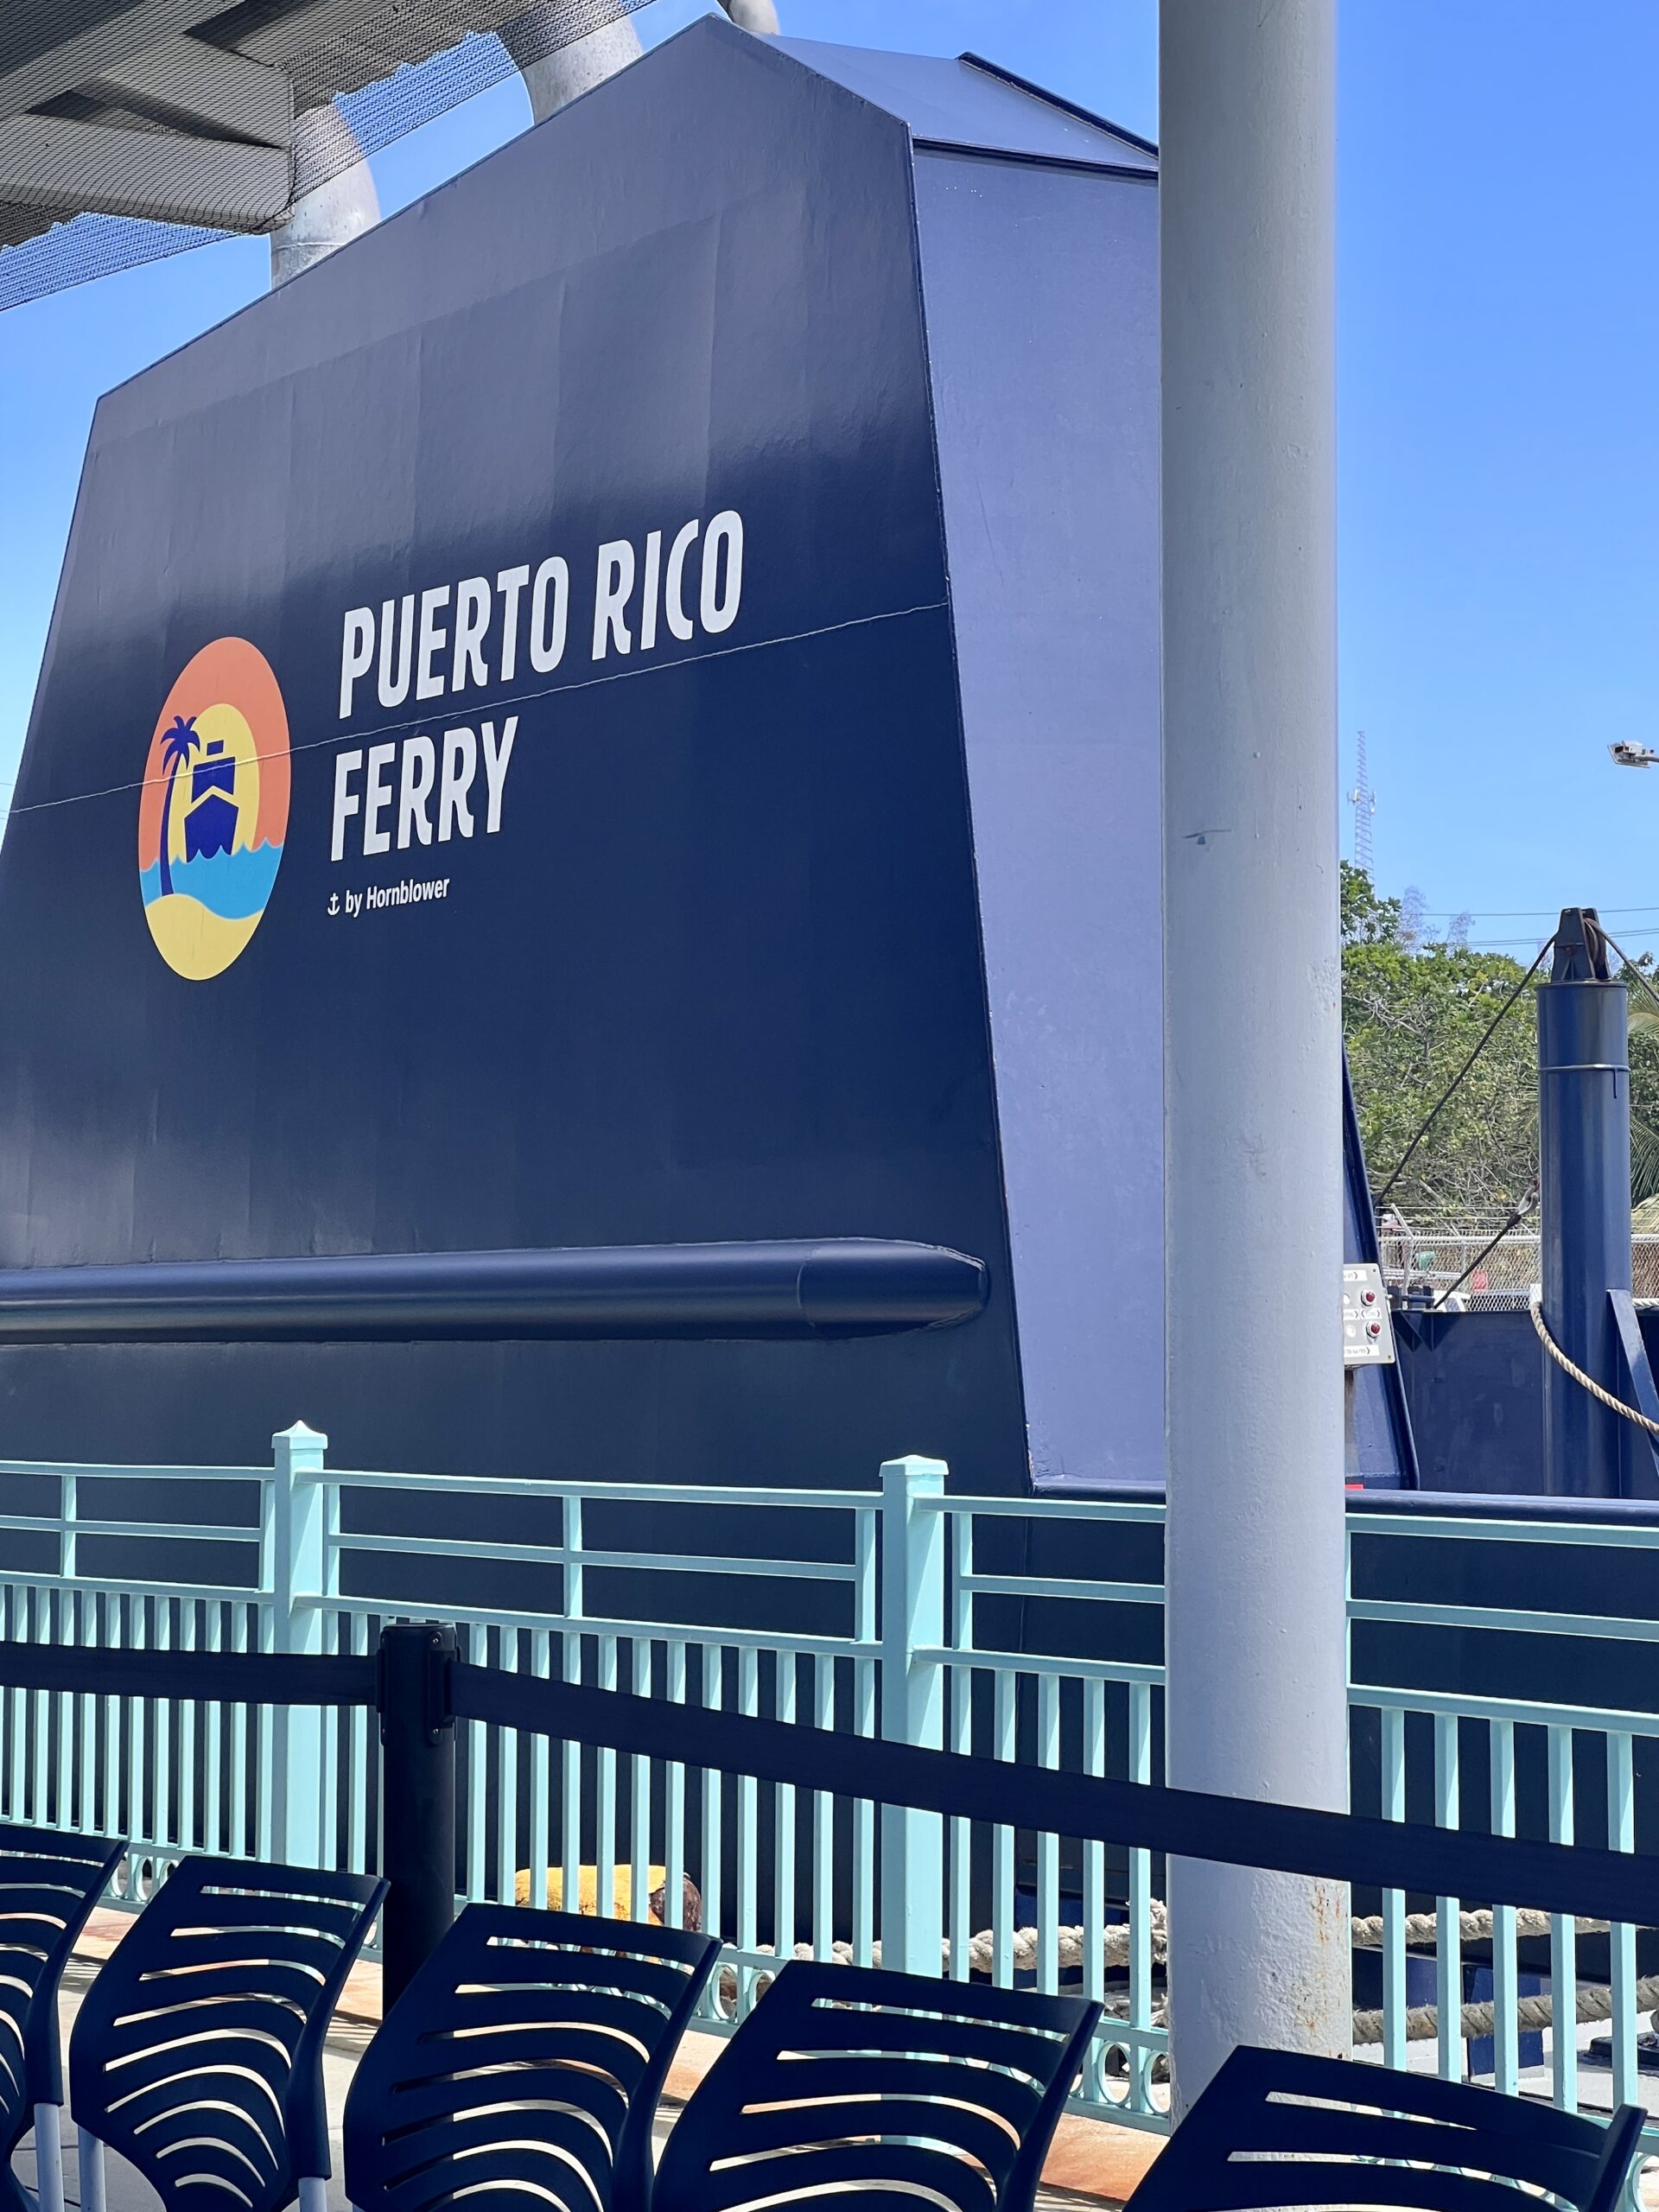 Taking the ferry in Puerto Rico